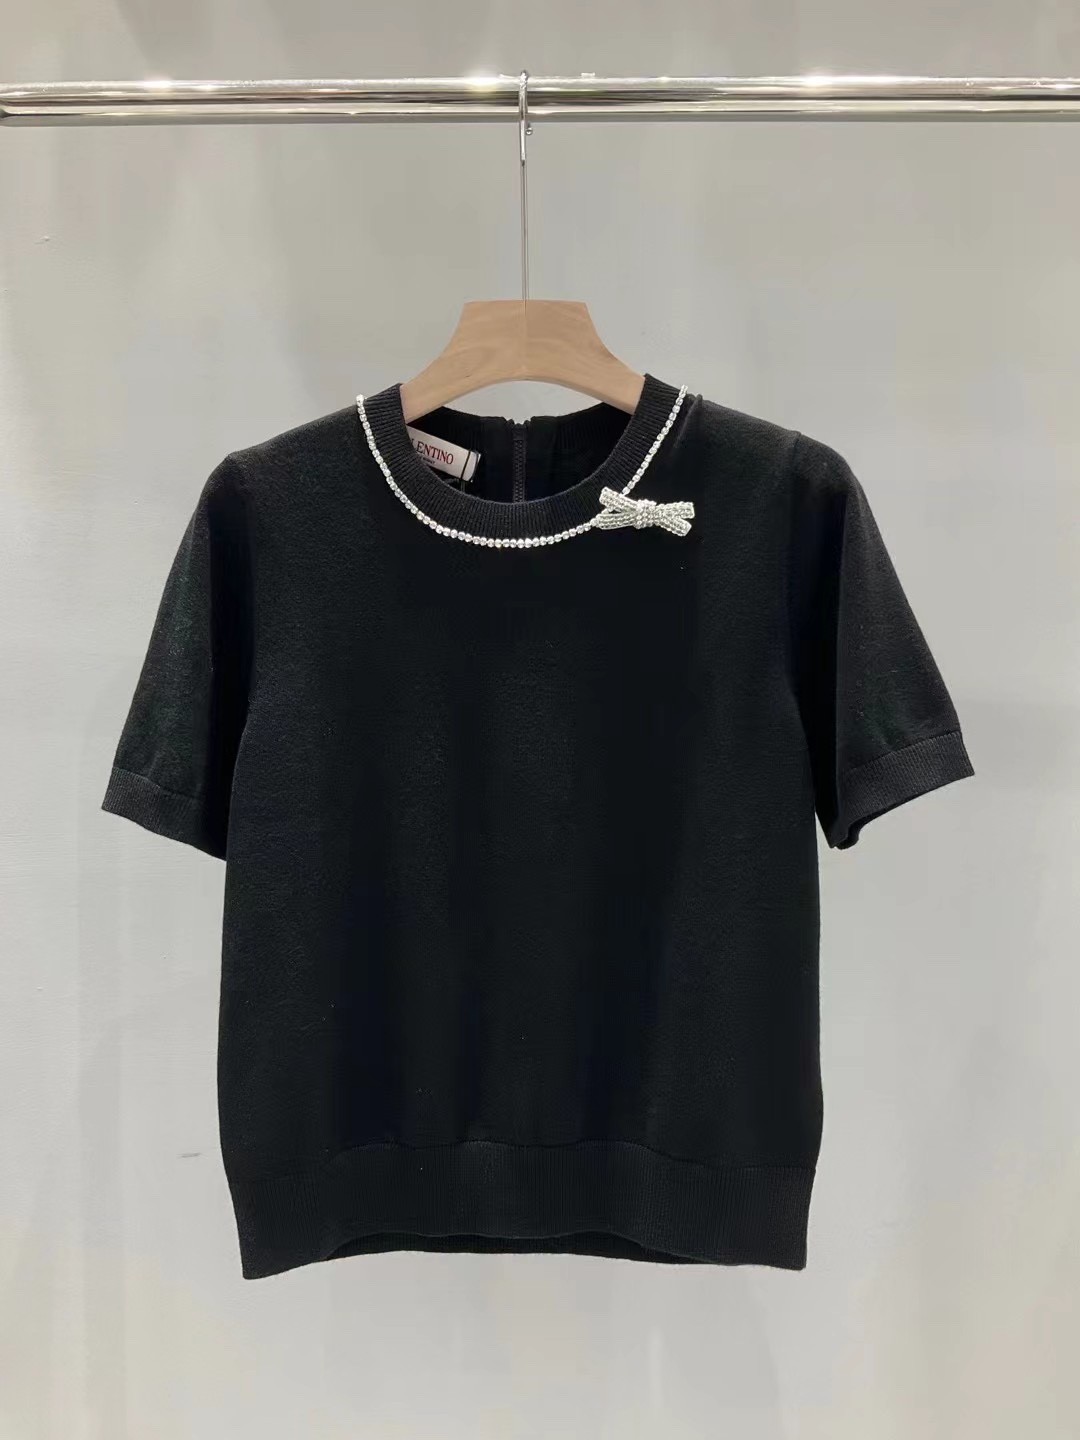 Valentino Clothing T-Shirt Knitting Wool Spring Collection Short Sleeve